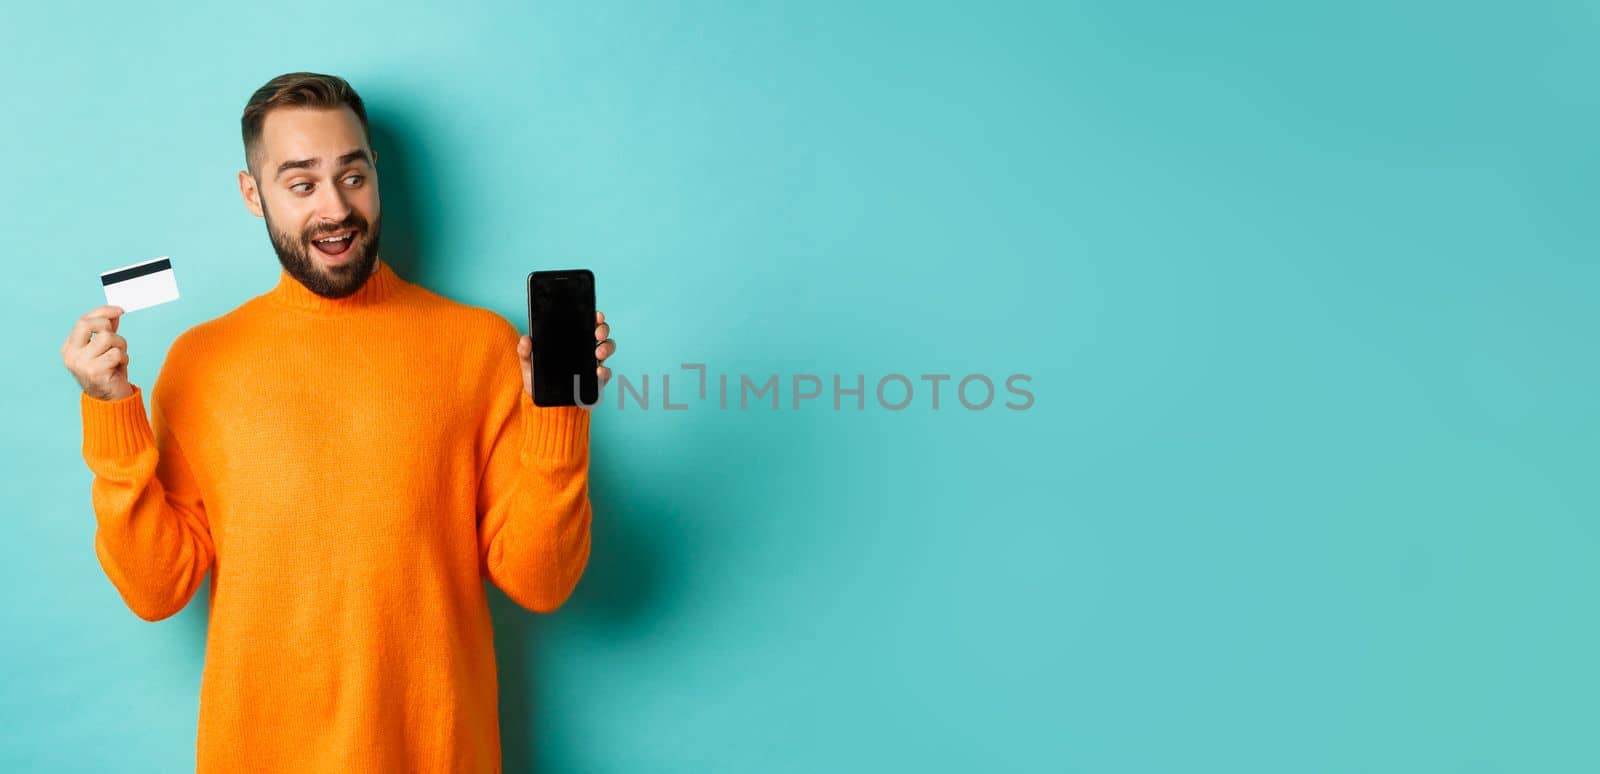 Online shopping. Amazed guy using credit card and showing mobile screen, looking impressed, standing against light blue background.